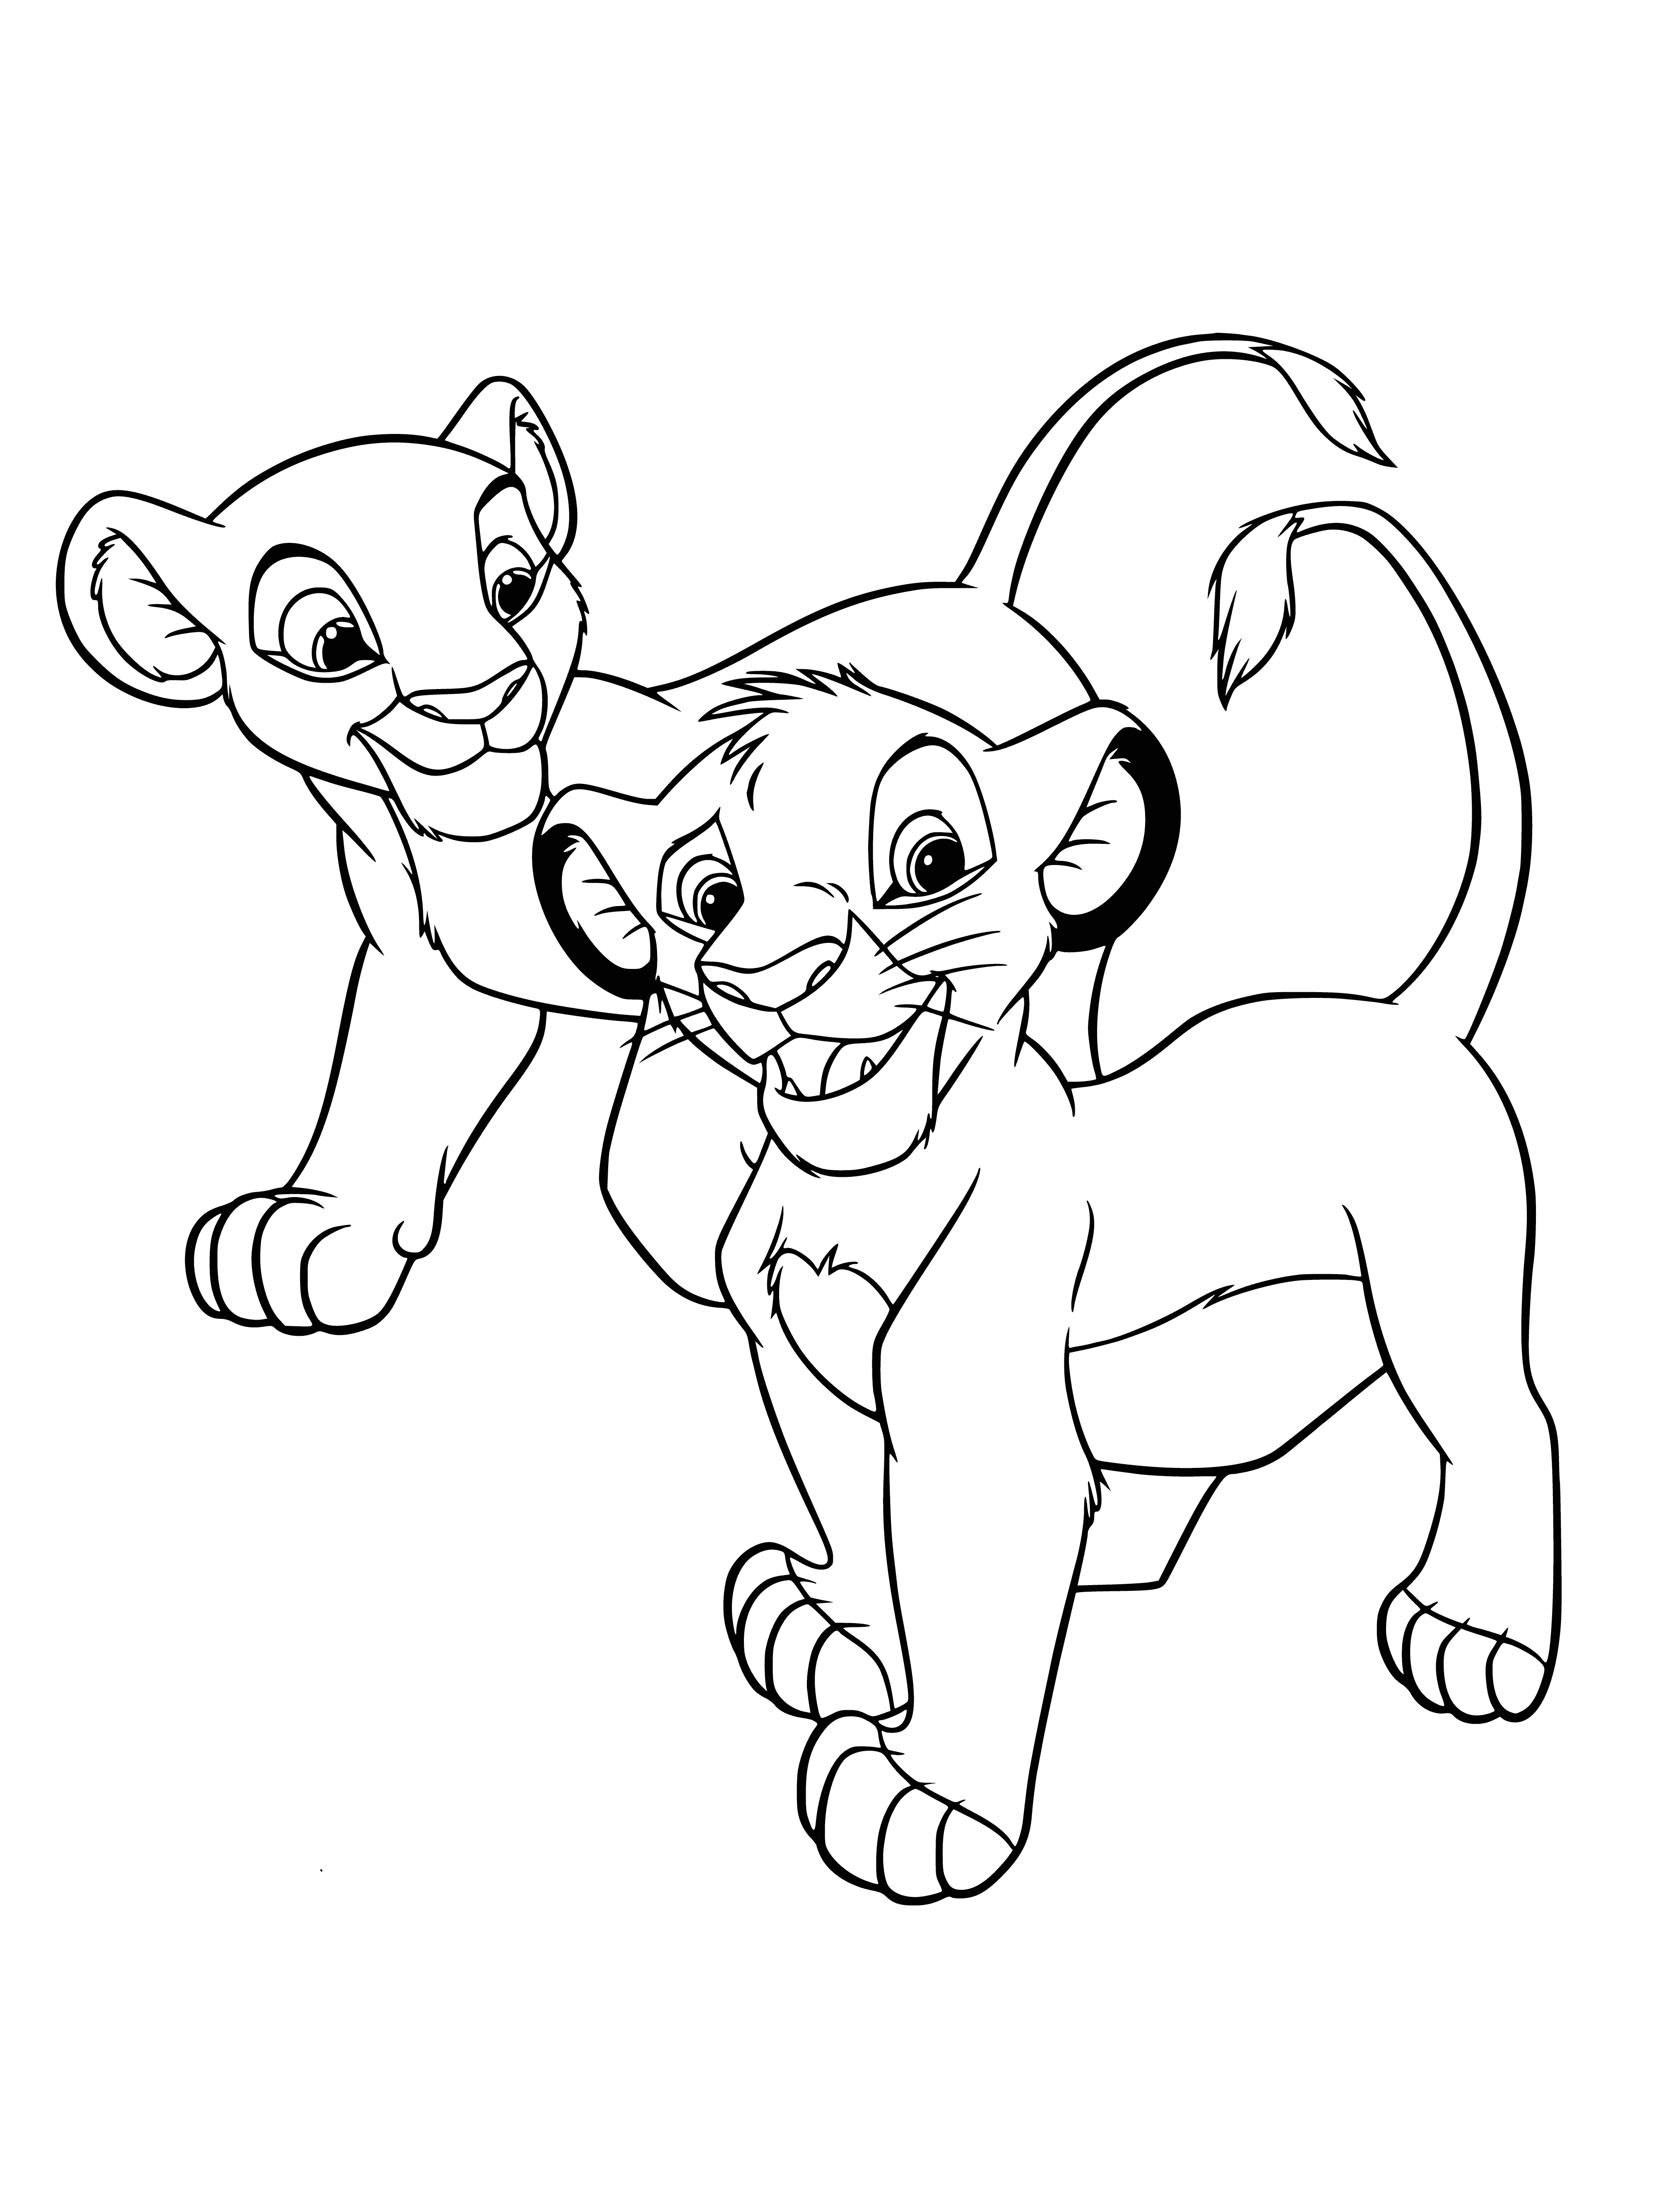 coloring page: Lion cubs standing together in a field, all looking in the same direction. #cubslove #bigcats